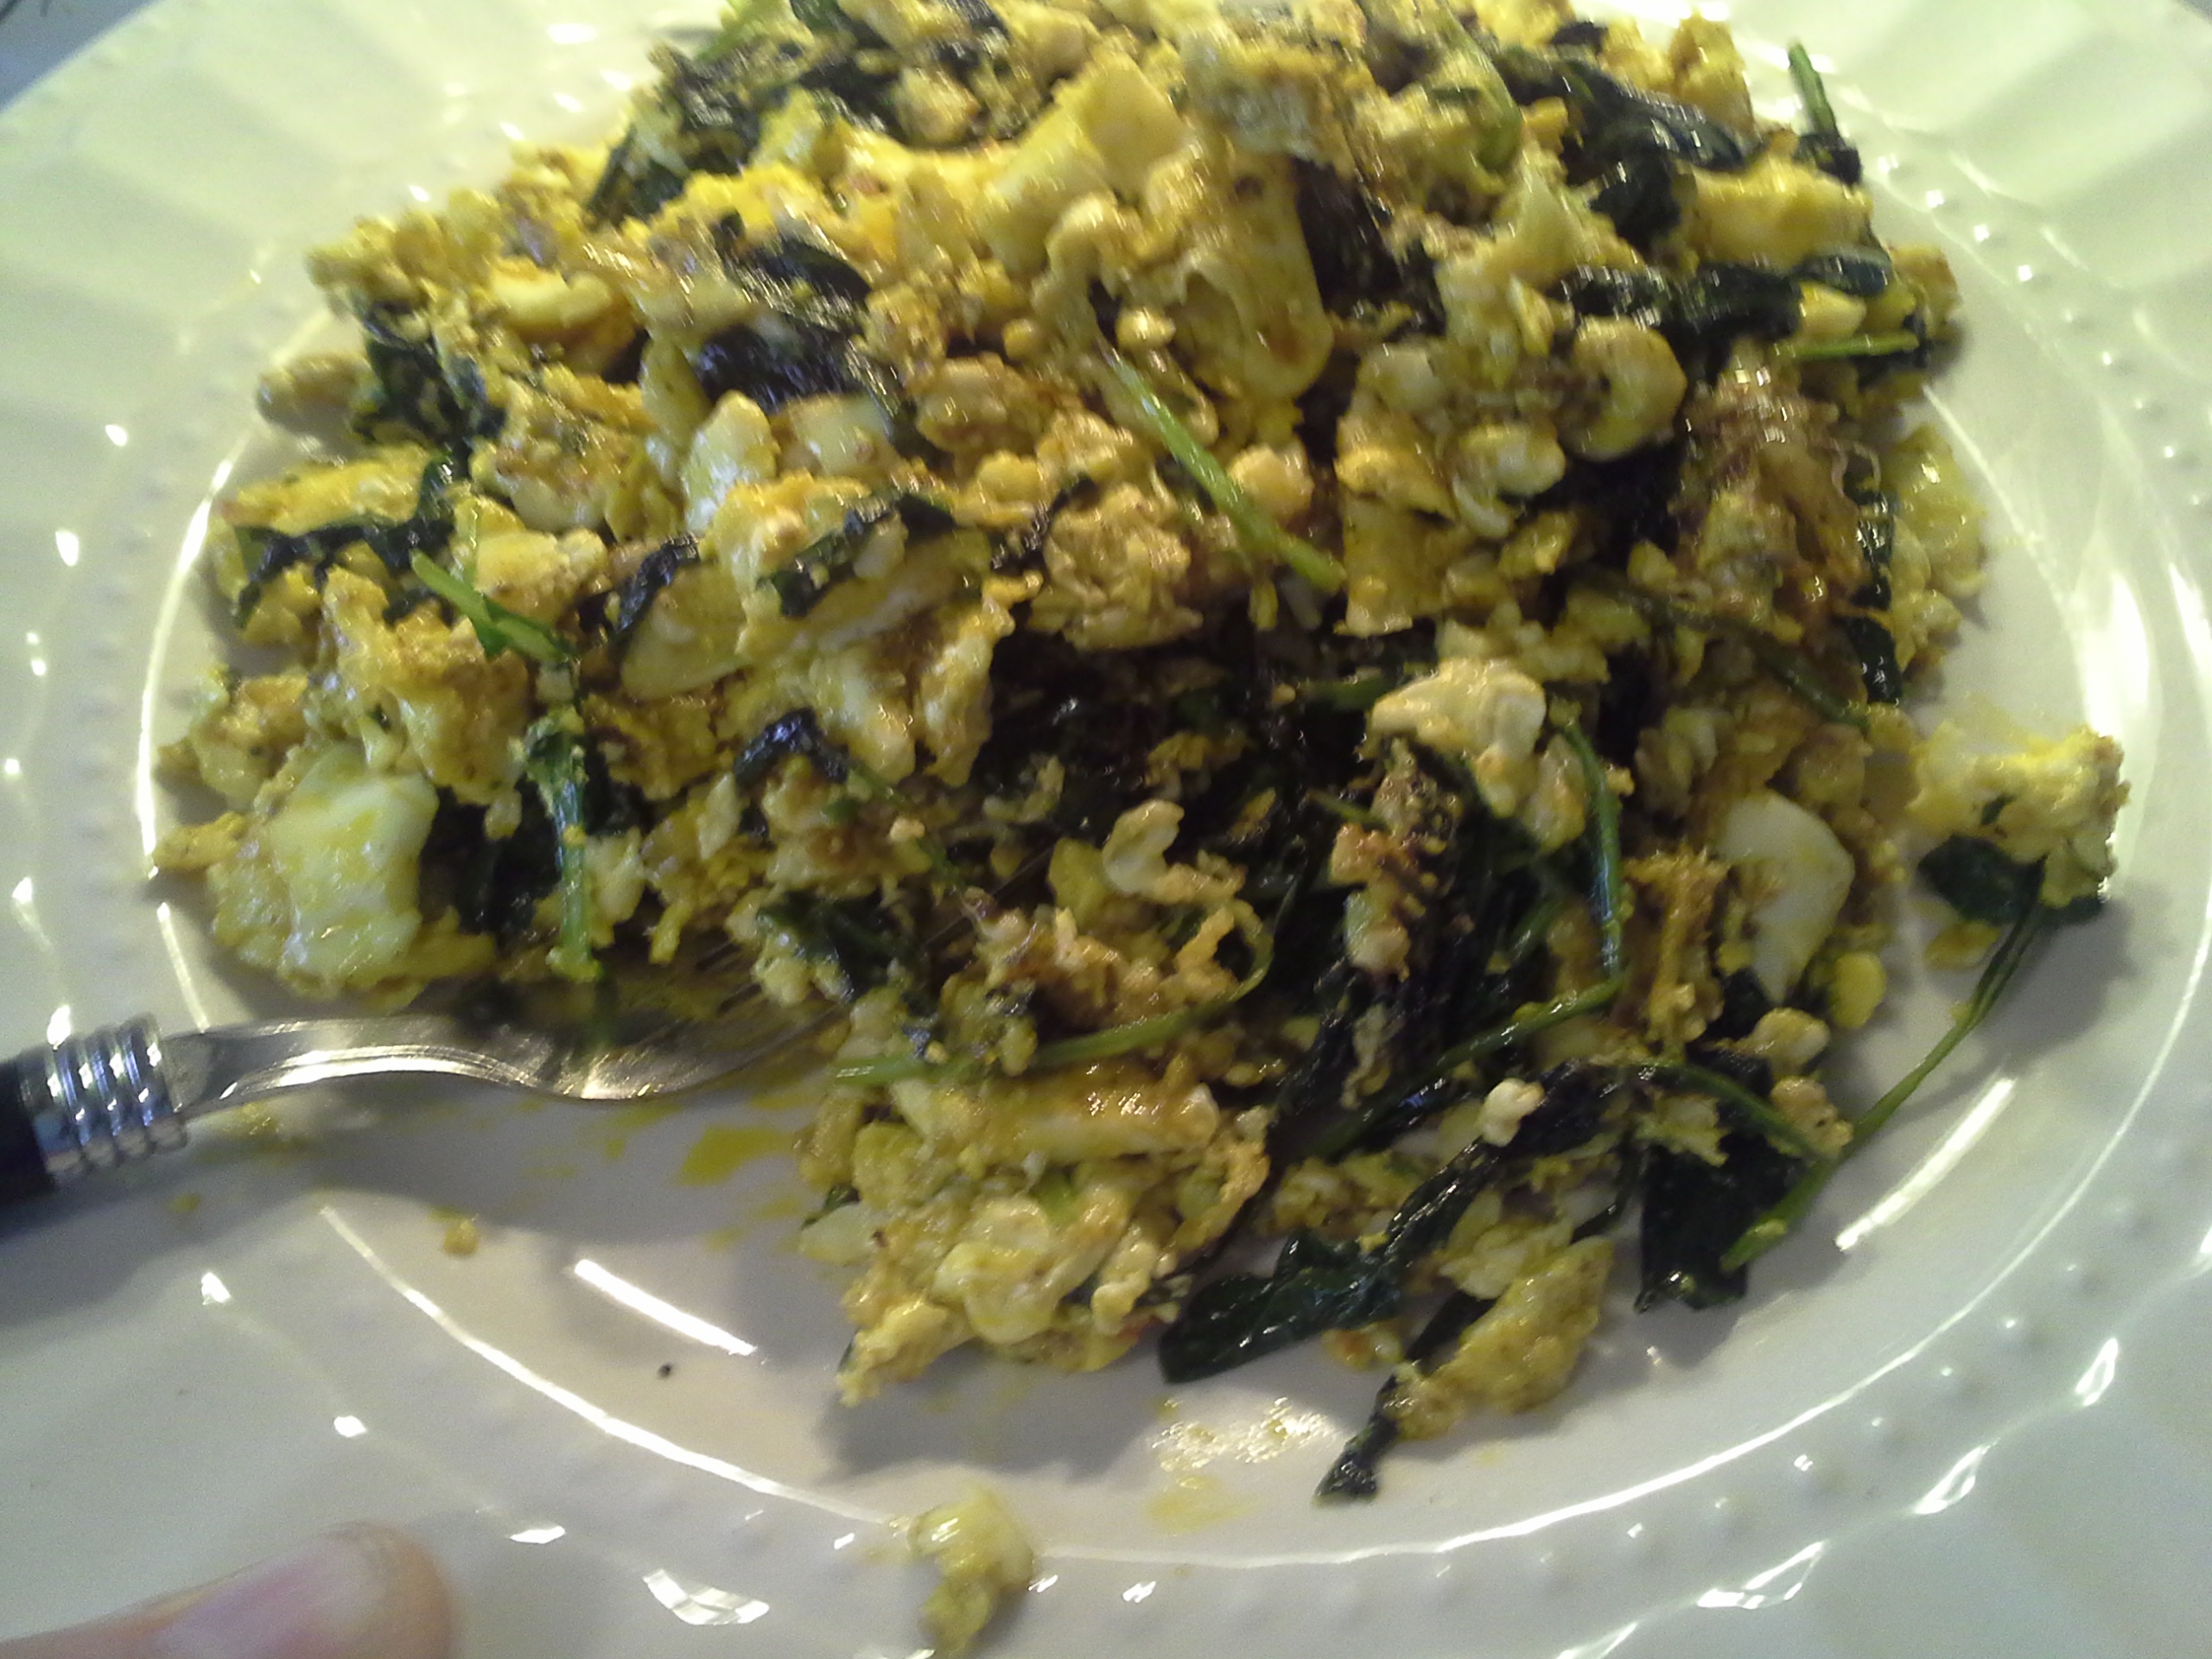 Breakfast: 10:40 a.m. | 4 eggs, greens mix, 2 Tbsp. red palm oil, herbs & spices